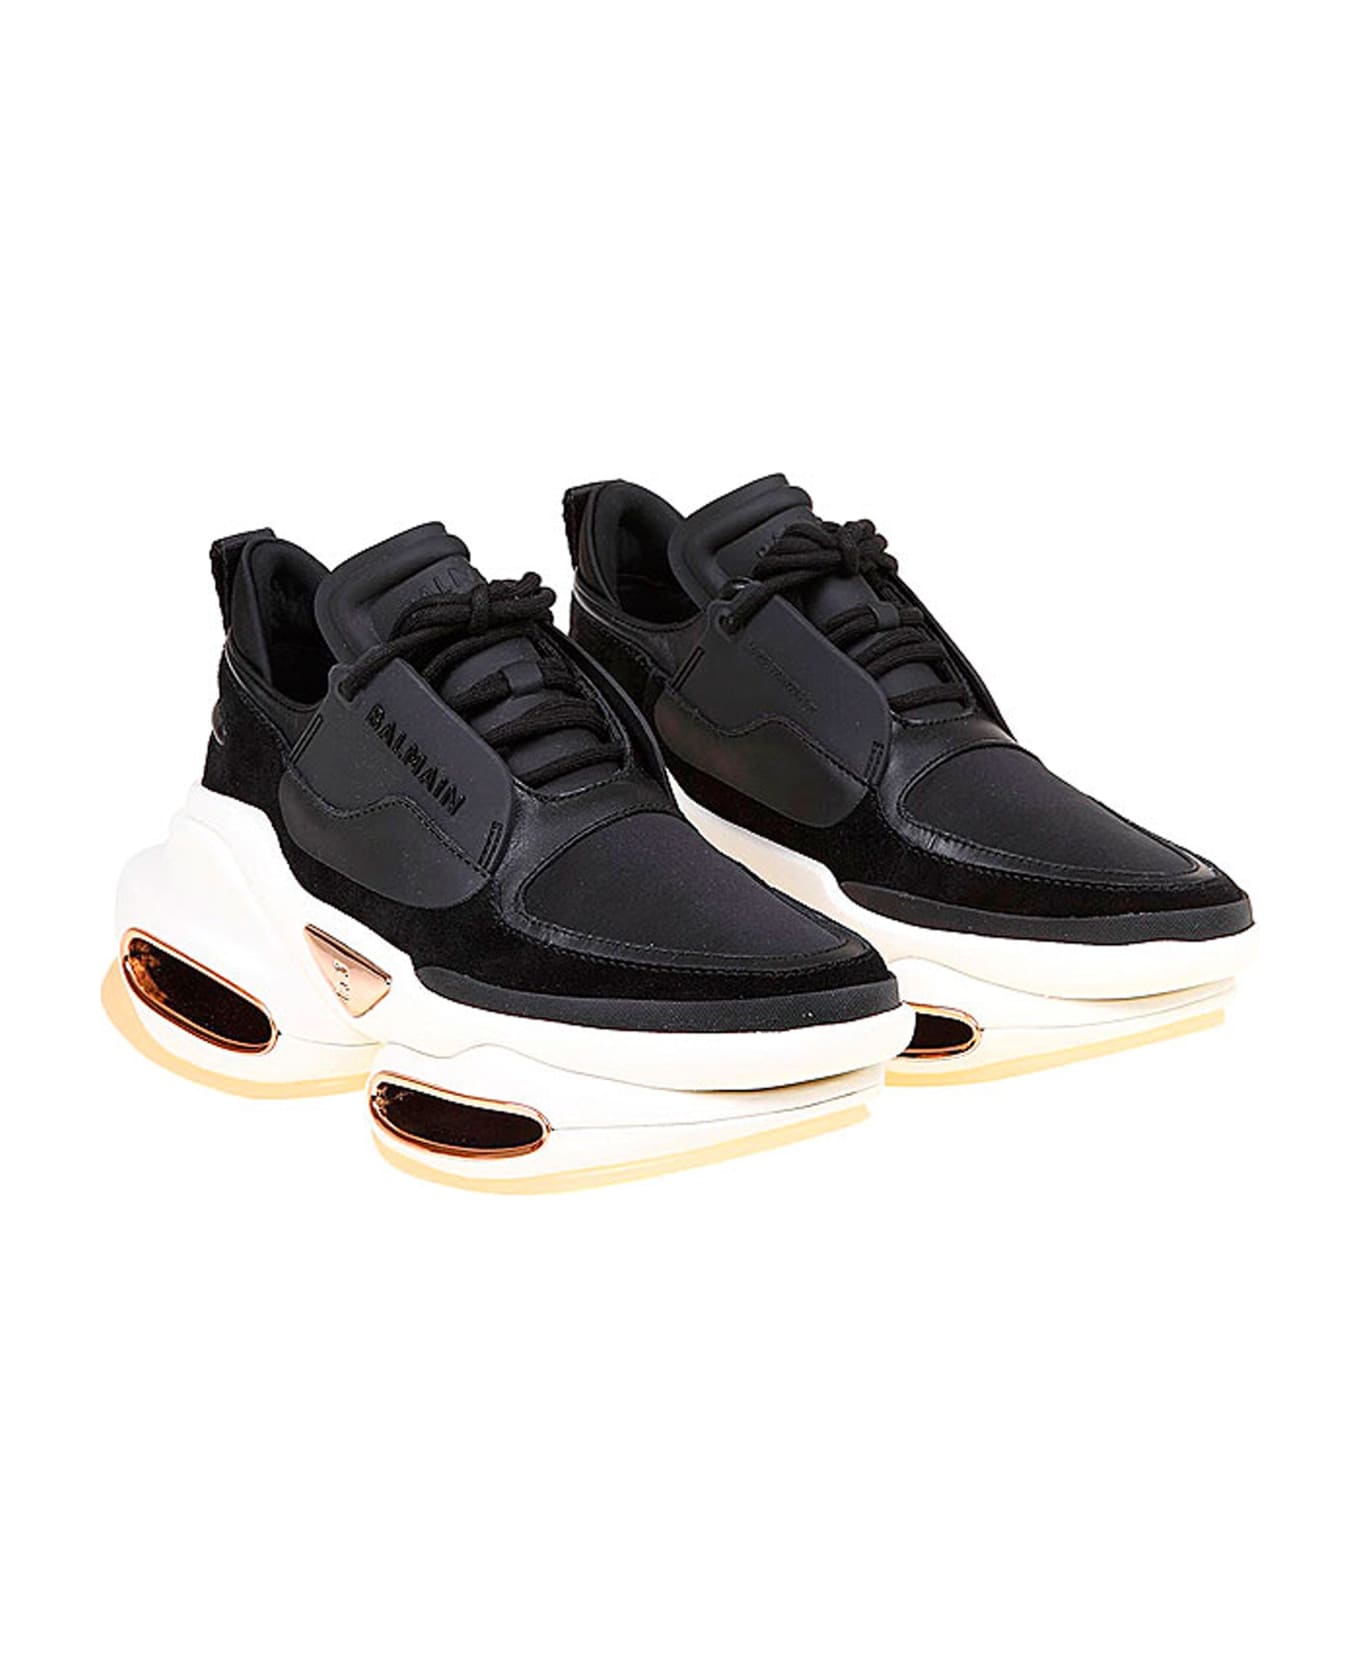 Balmain Leather And Fabric Sneakers - Black